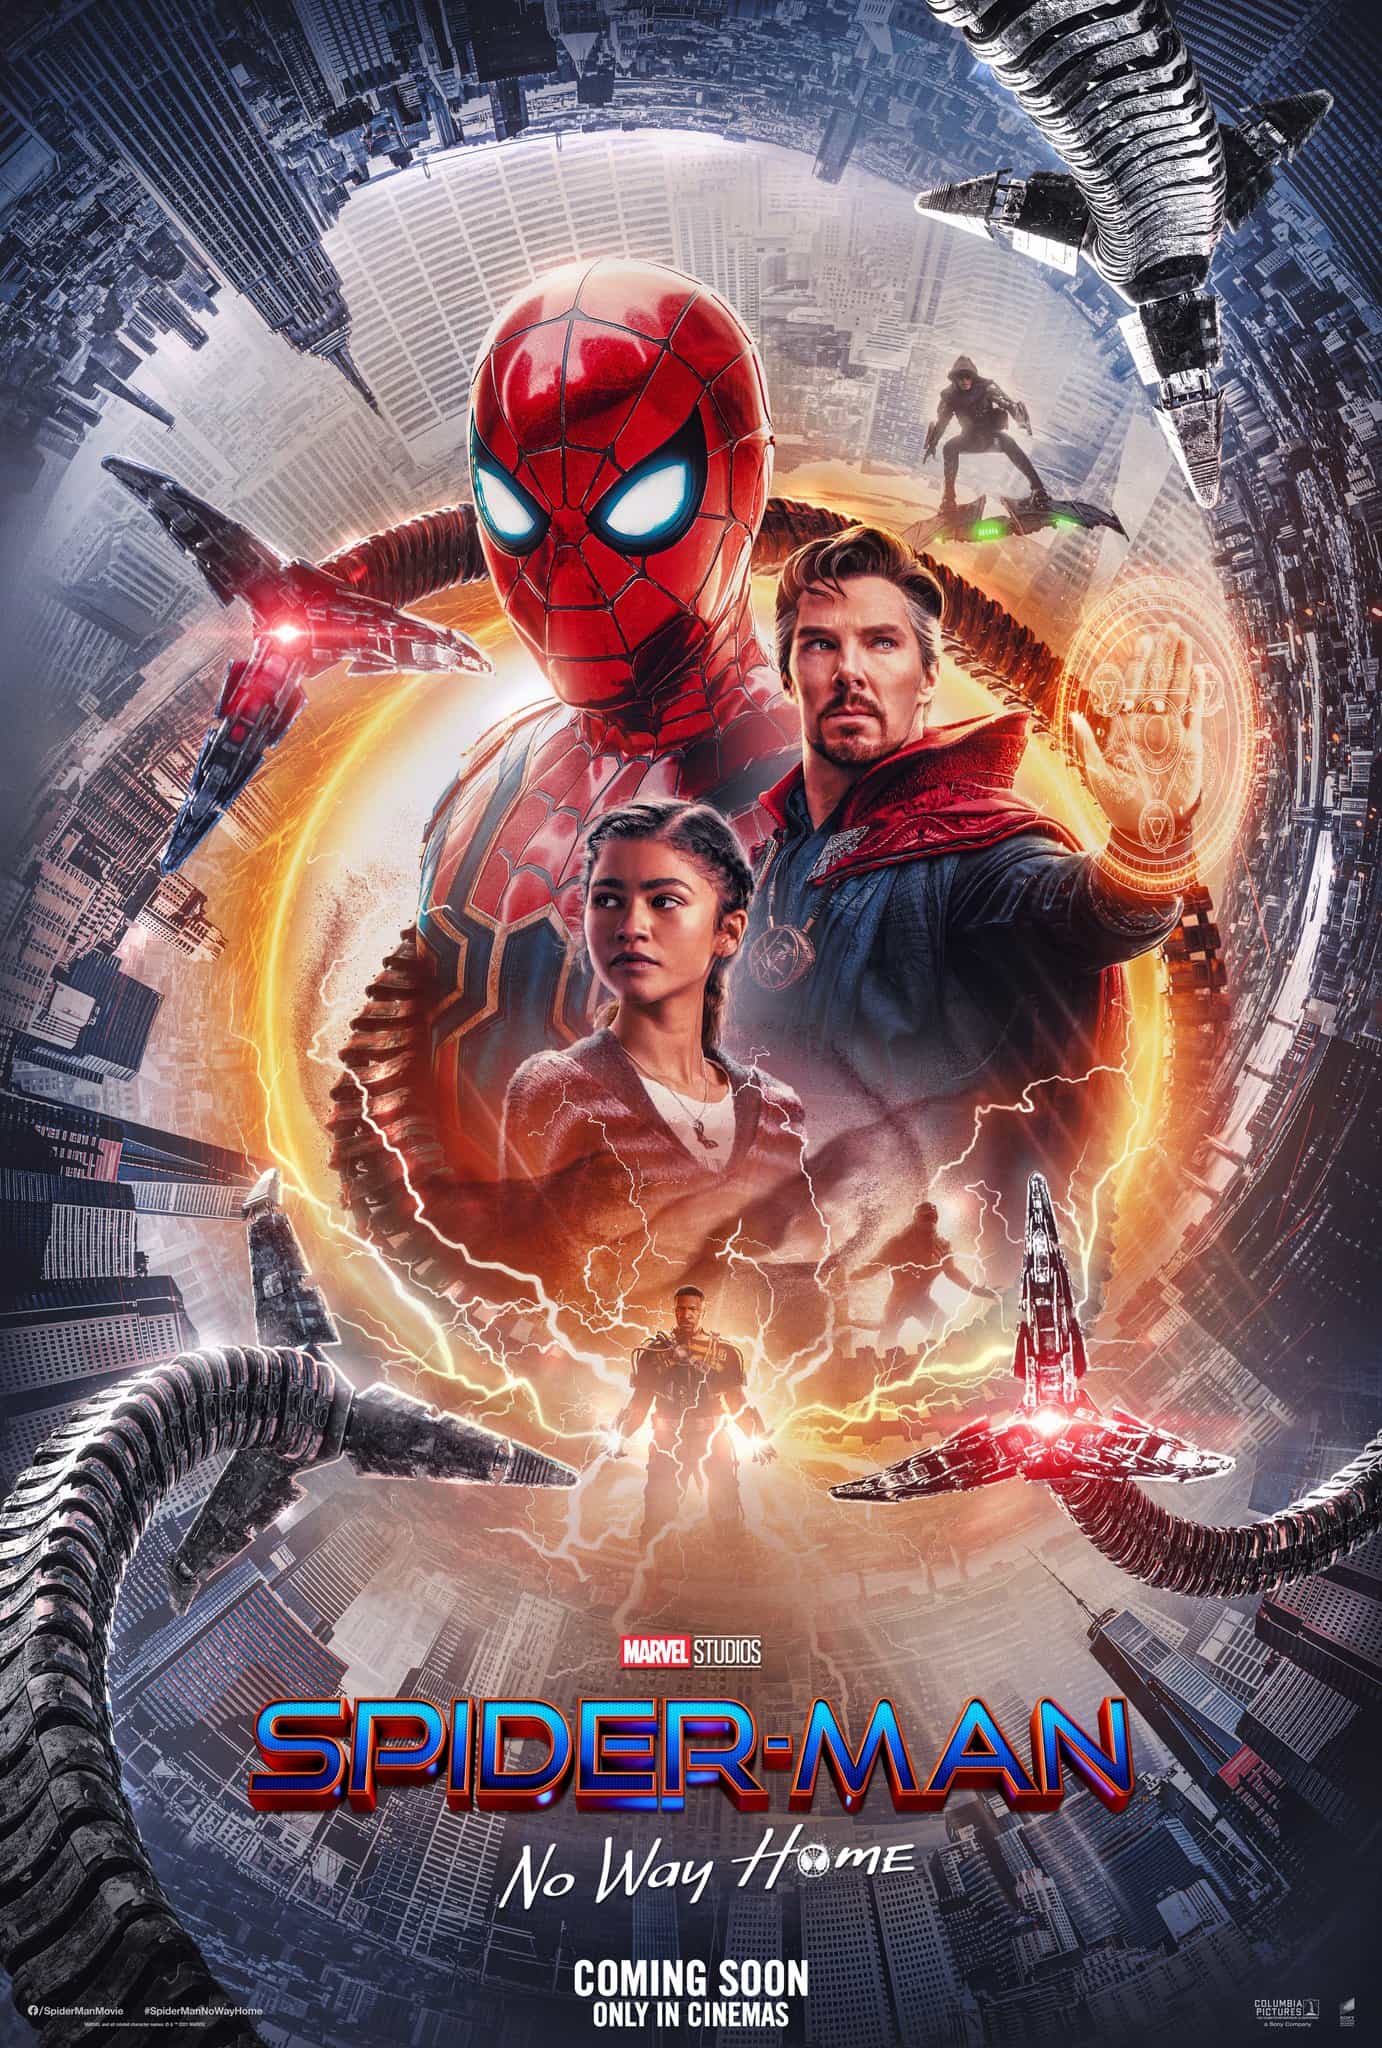 US Box Office Weekend Report 28th - 30th January 2022:  Spider-Man is the top movie once again on its seventh weekend on release